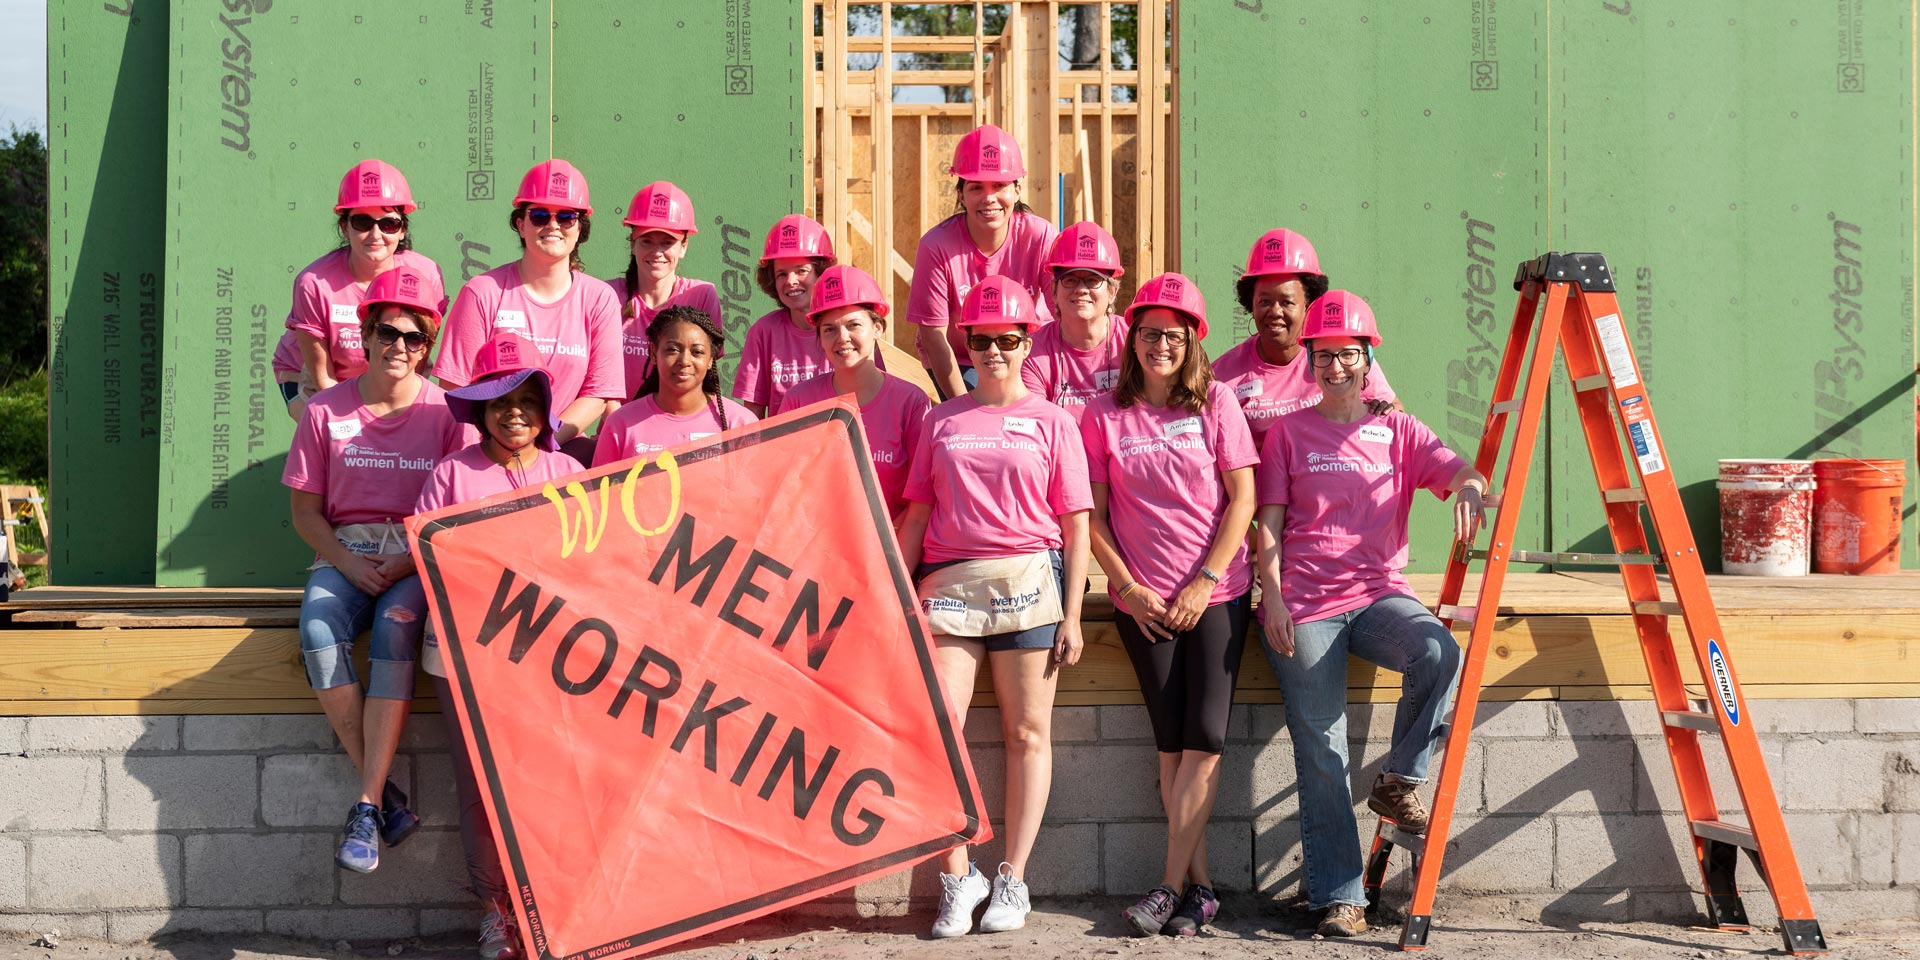 Group of people standing at construction site with construction sign that says “Wo” Men Working